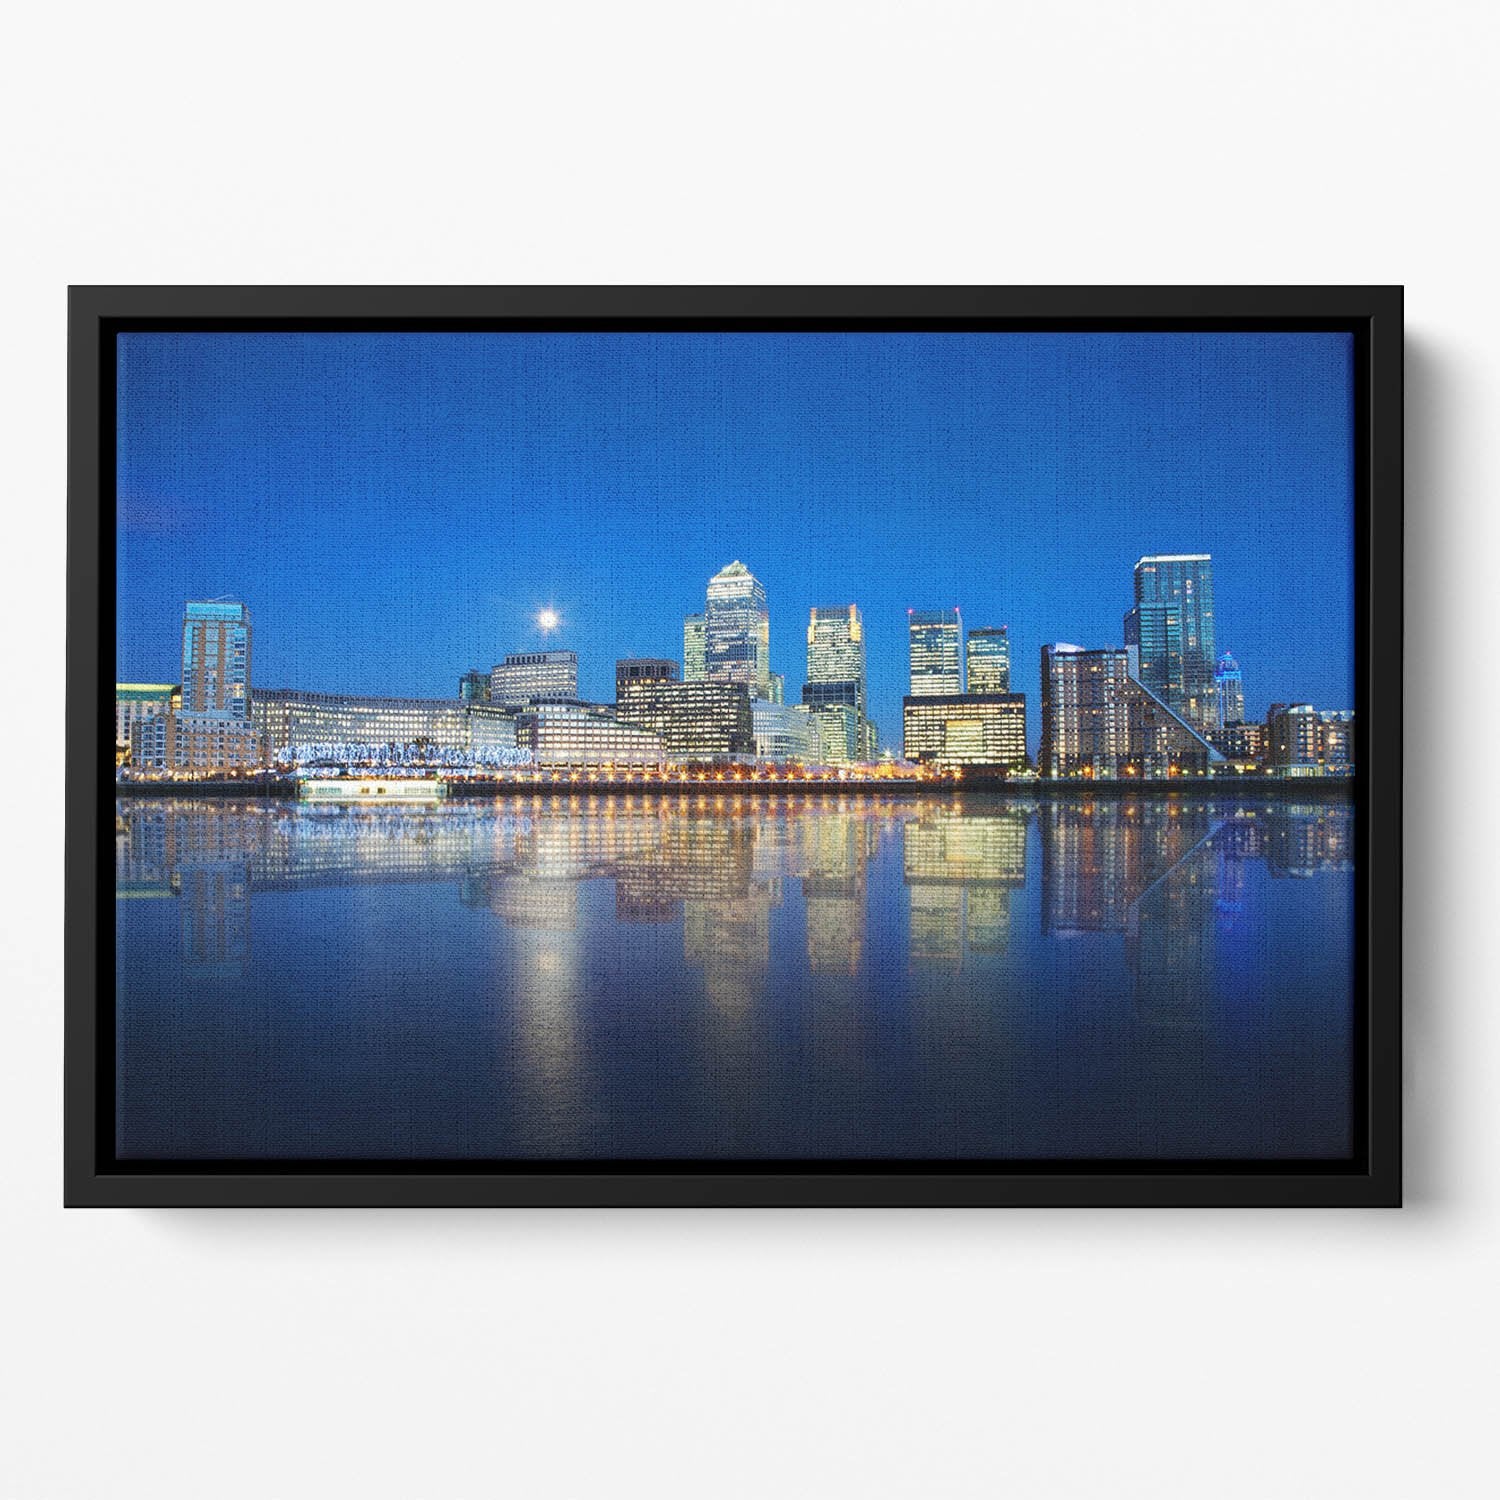 London skyscrapers reflected Floating Framed Canvas